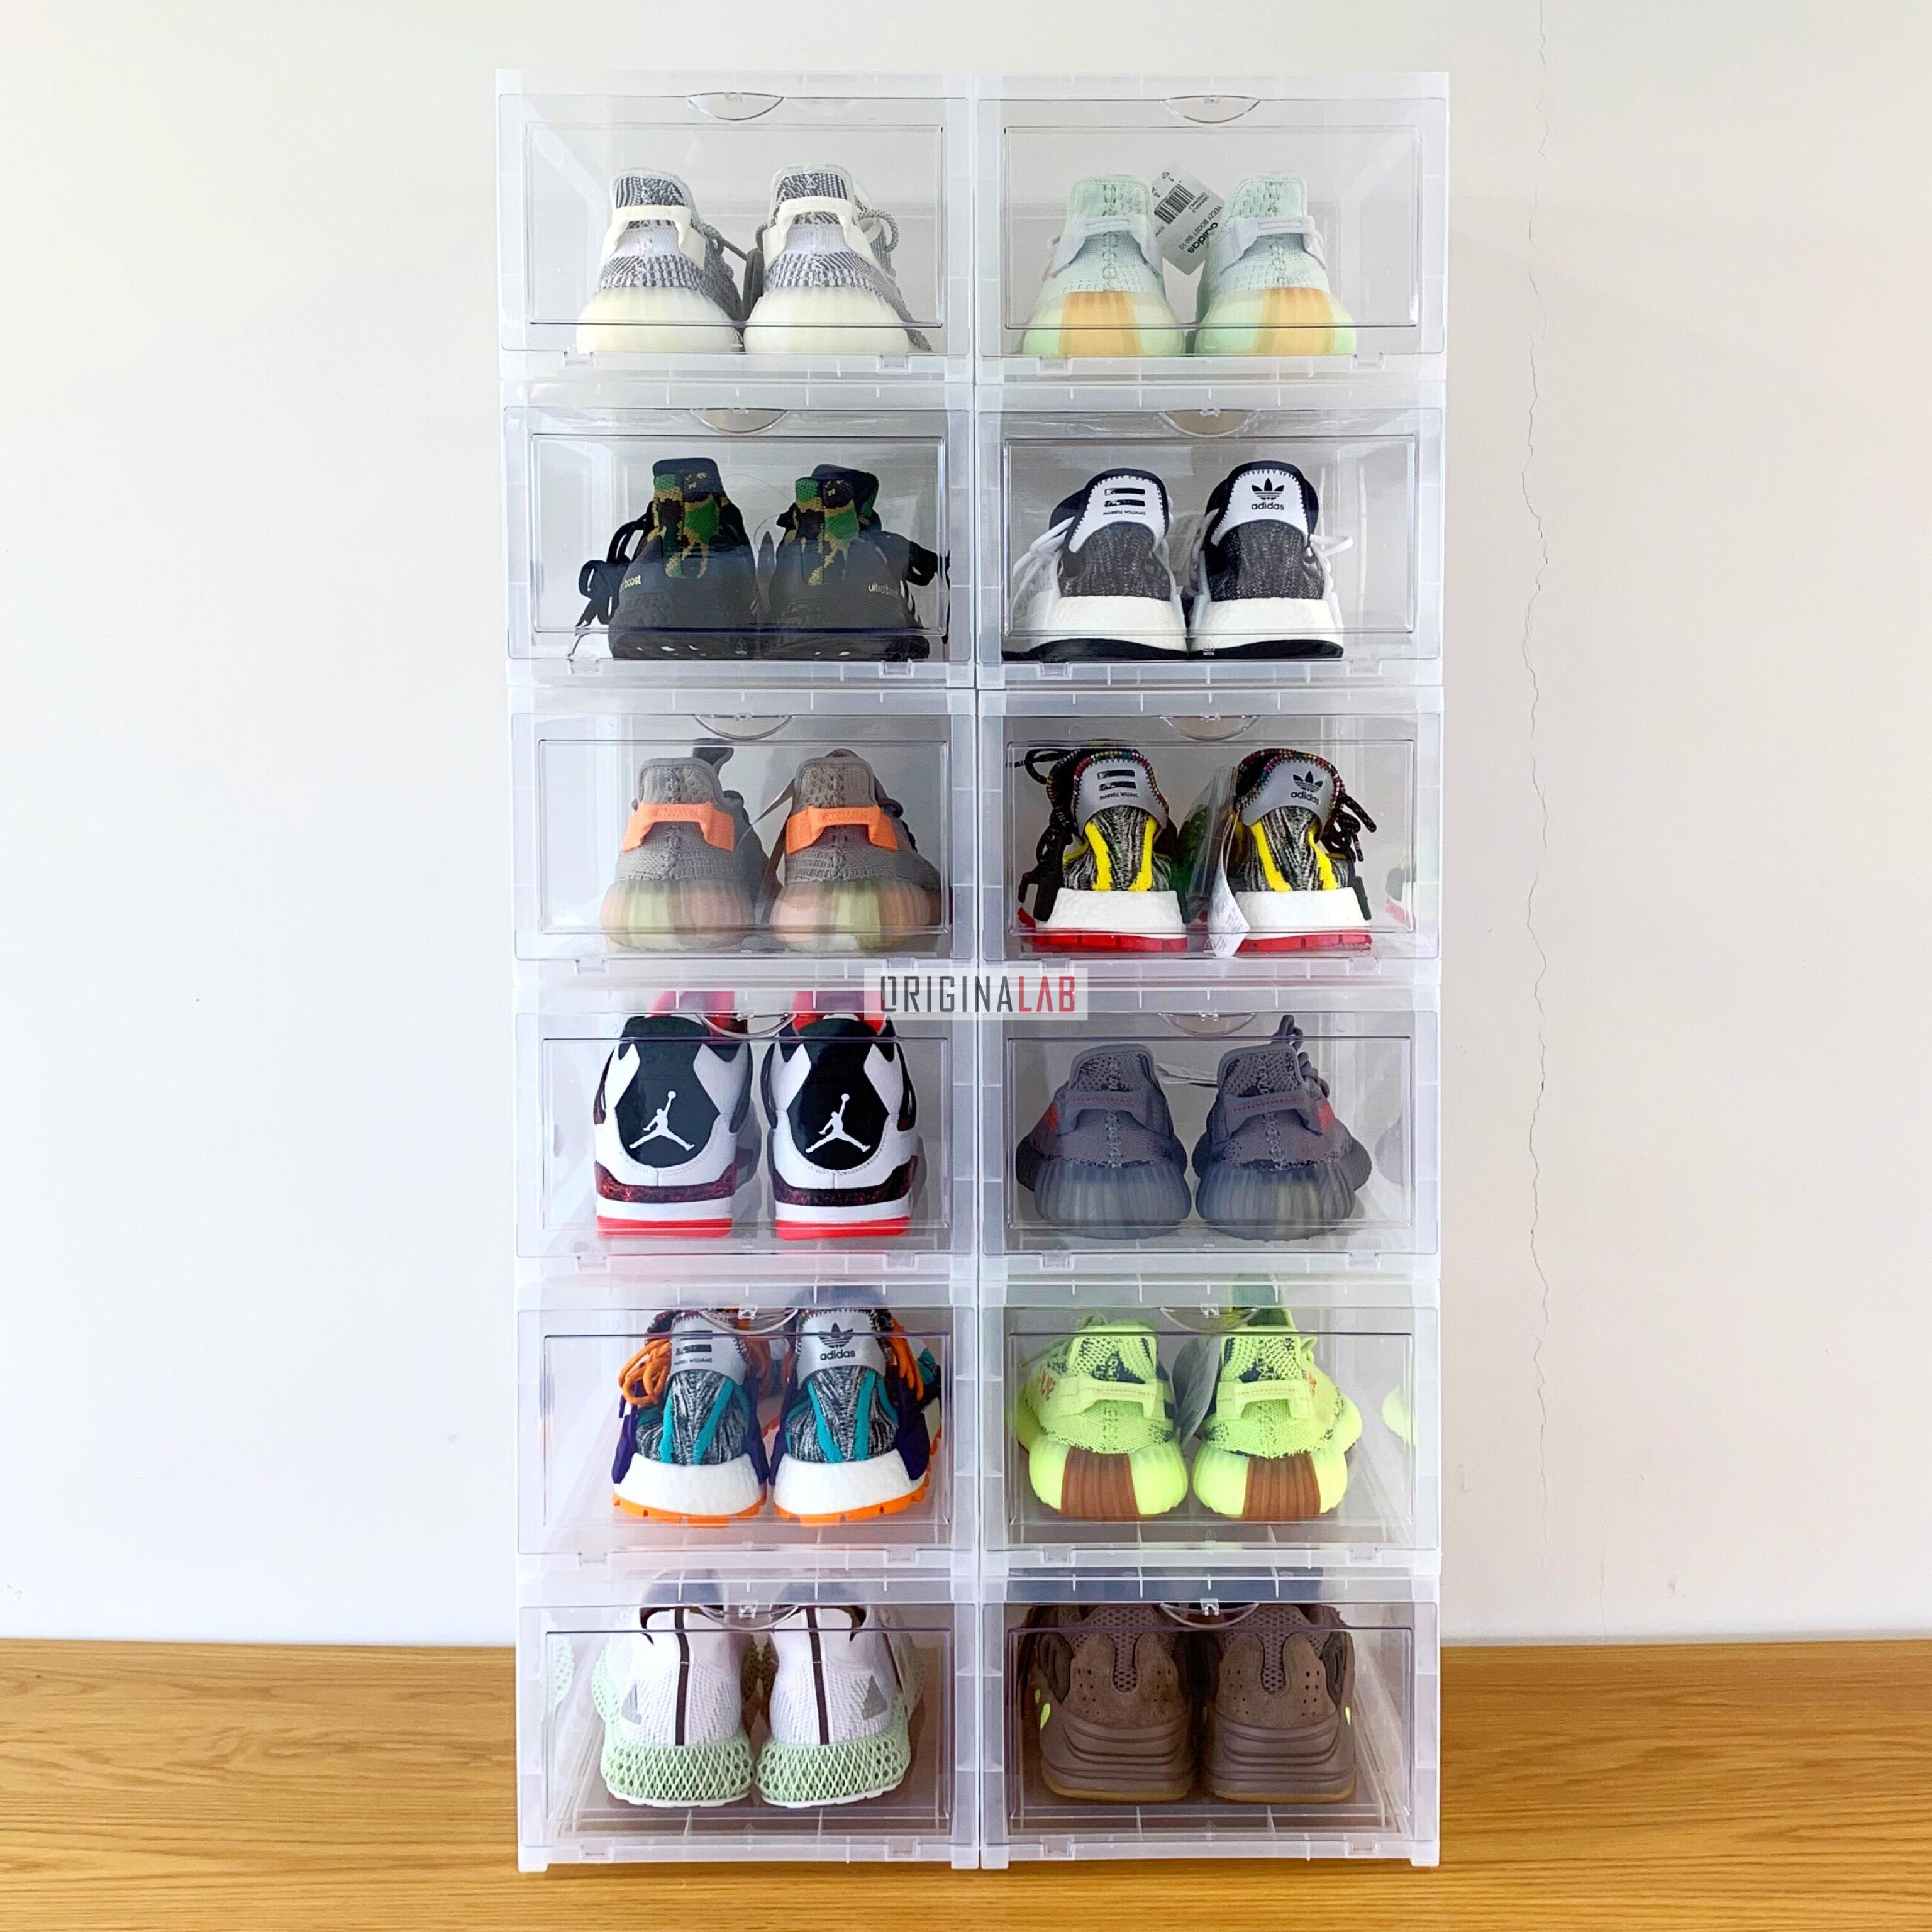 the shoe box sneakers